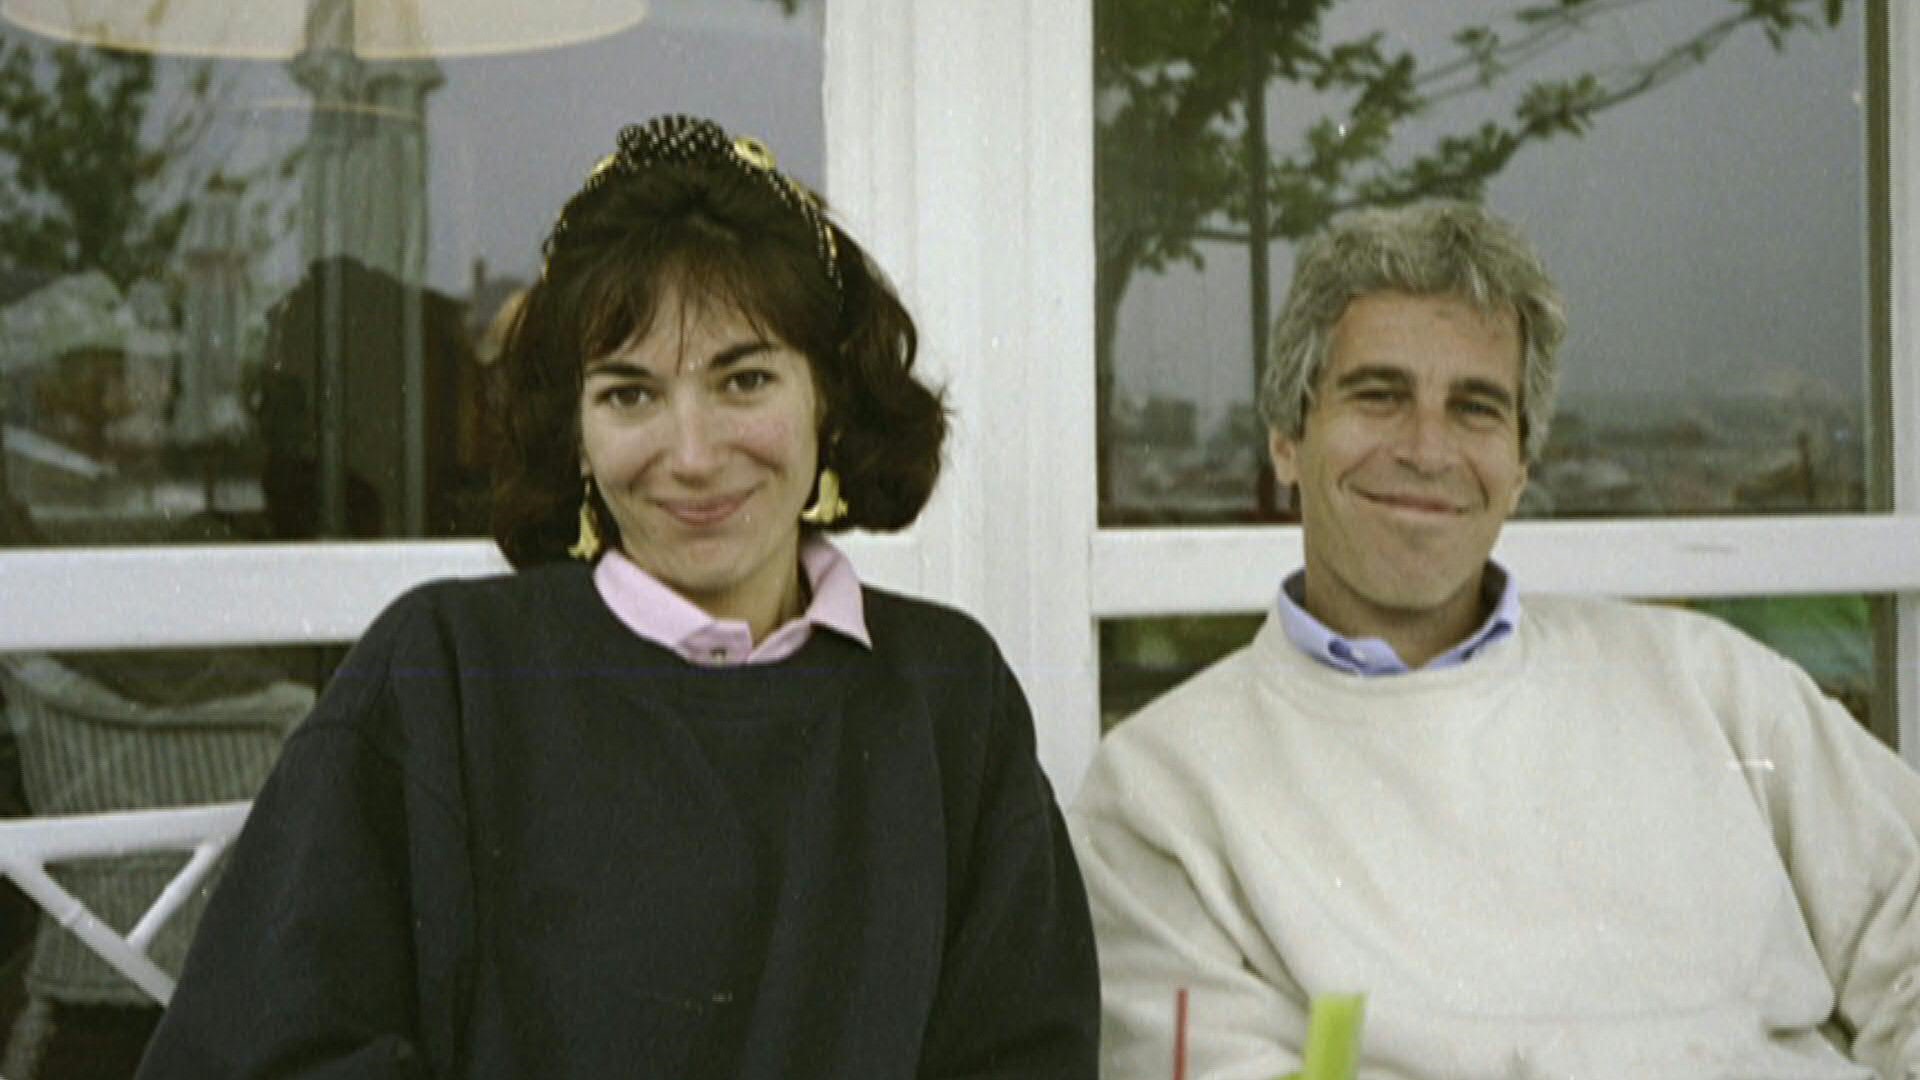 Ghislaine Maxwell, the 'socialite' friend of British royalty and many powerful cream and cream of politics and finance, was sentenced to 20 years in prison for participating in a scheme of sexual exploitation and child abuse for the deceased financier Jeffrey Epstein over a decade